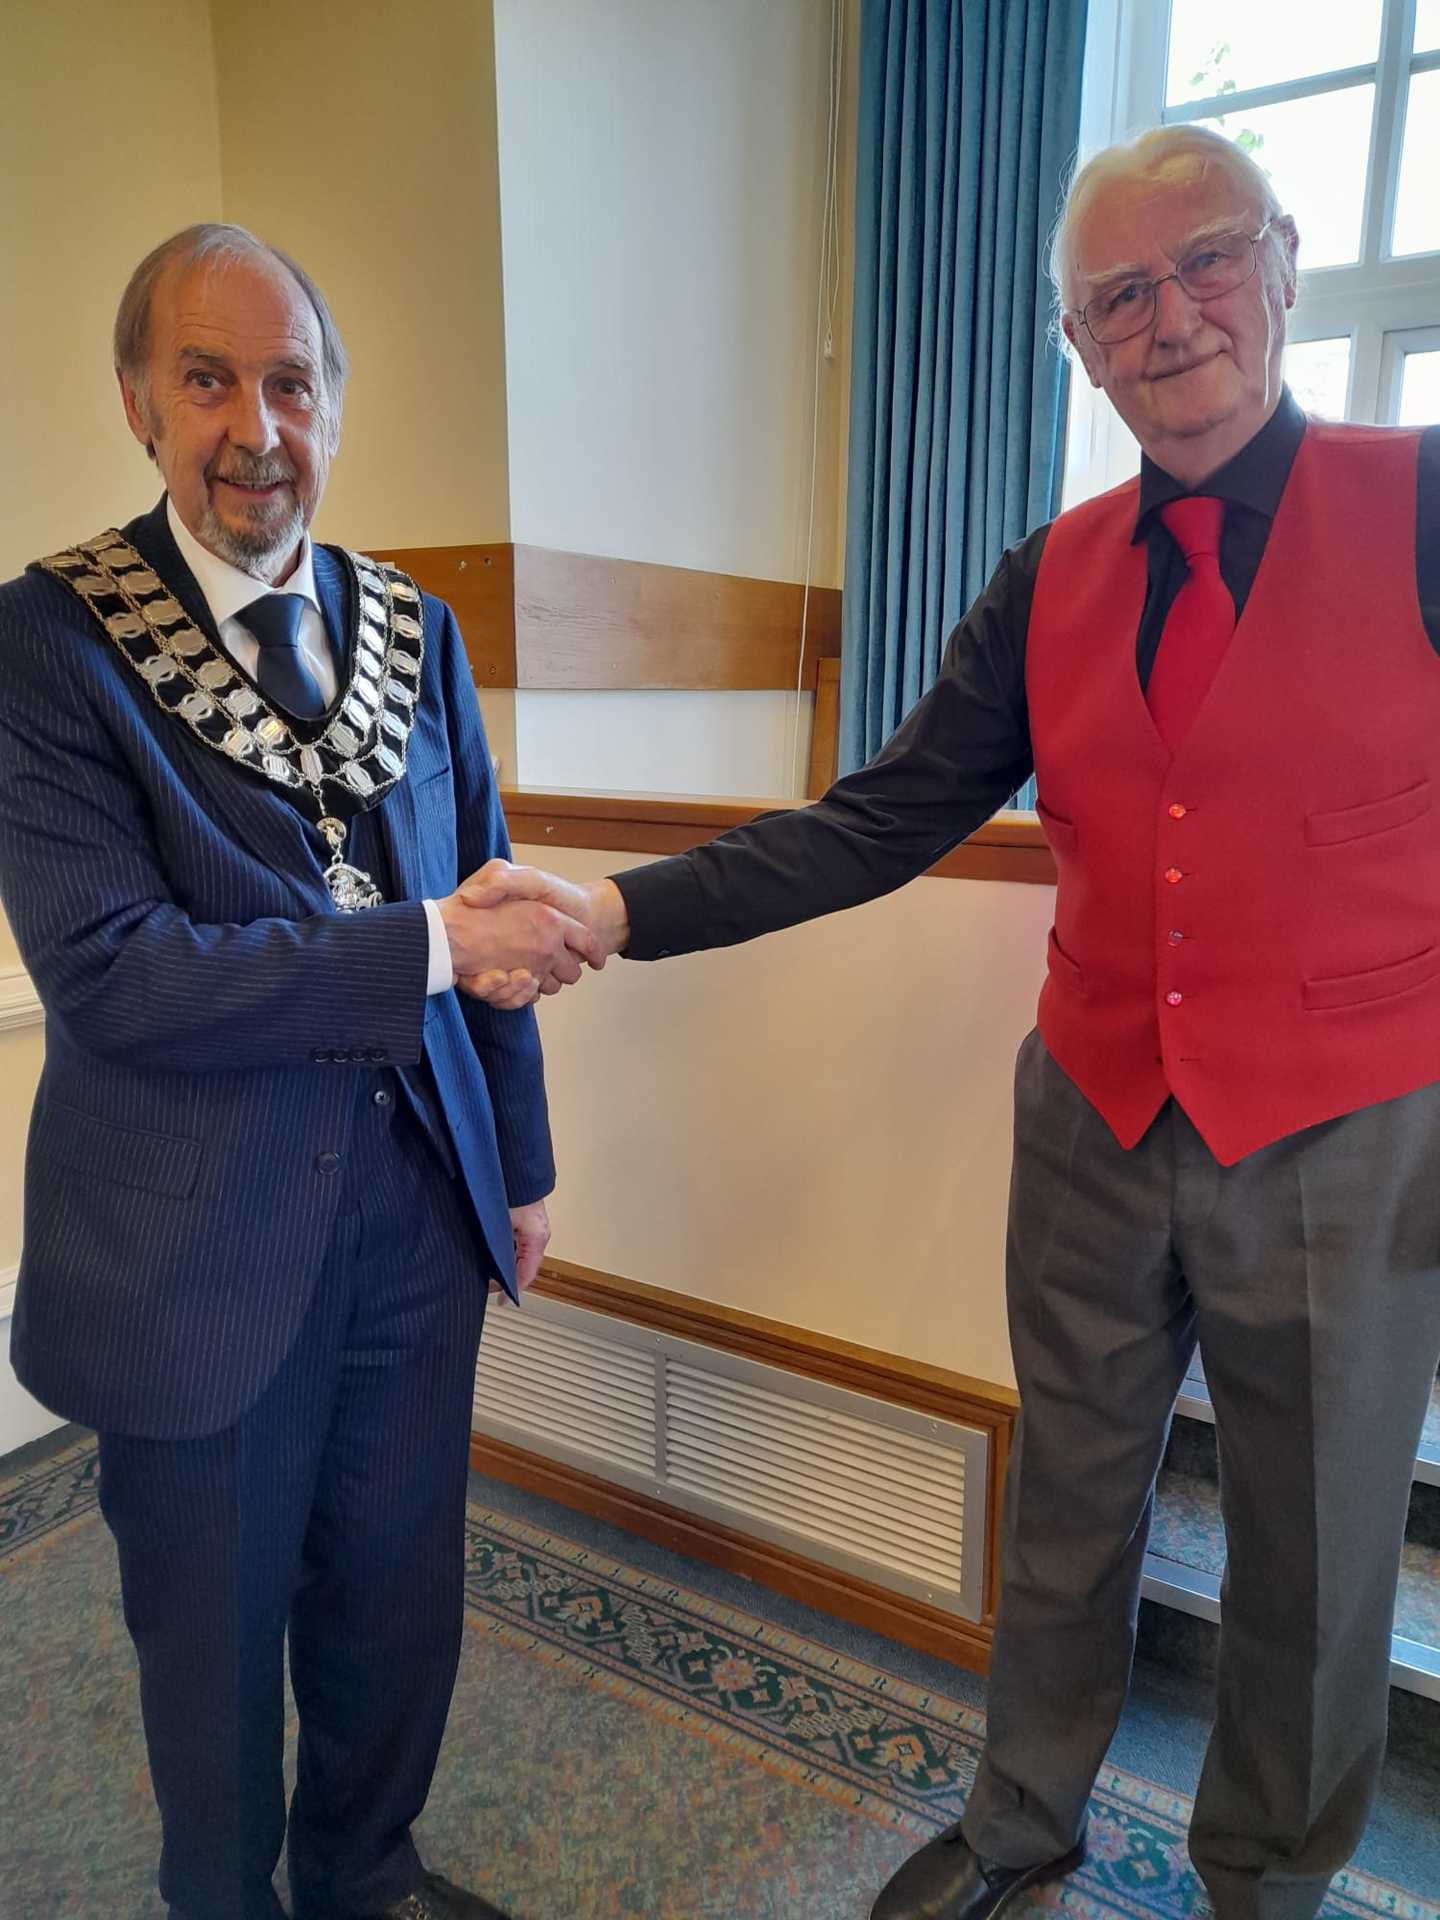 Ripley Mayor Councillor Paul Lobley BEM receiving the Mayoral chain from the former Mayor, Cllr Nigel Weaving.